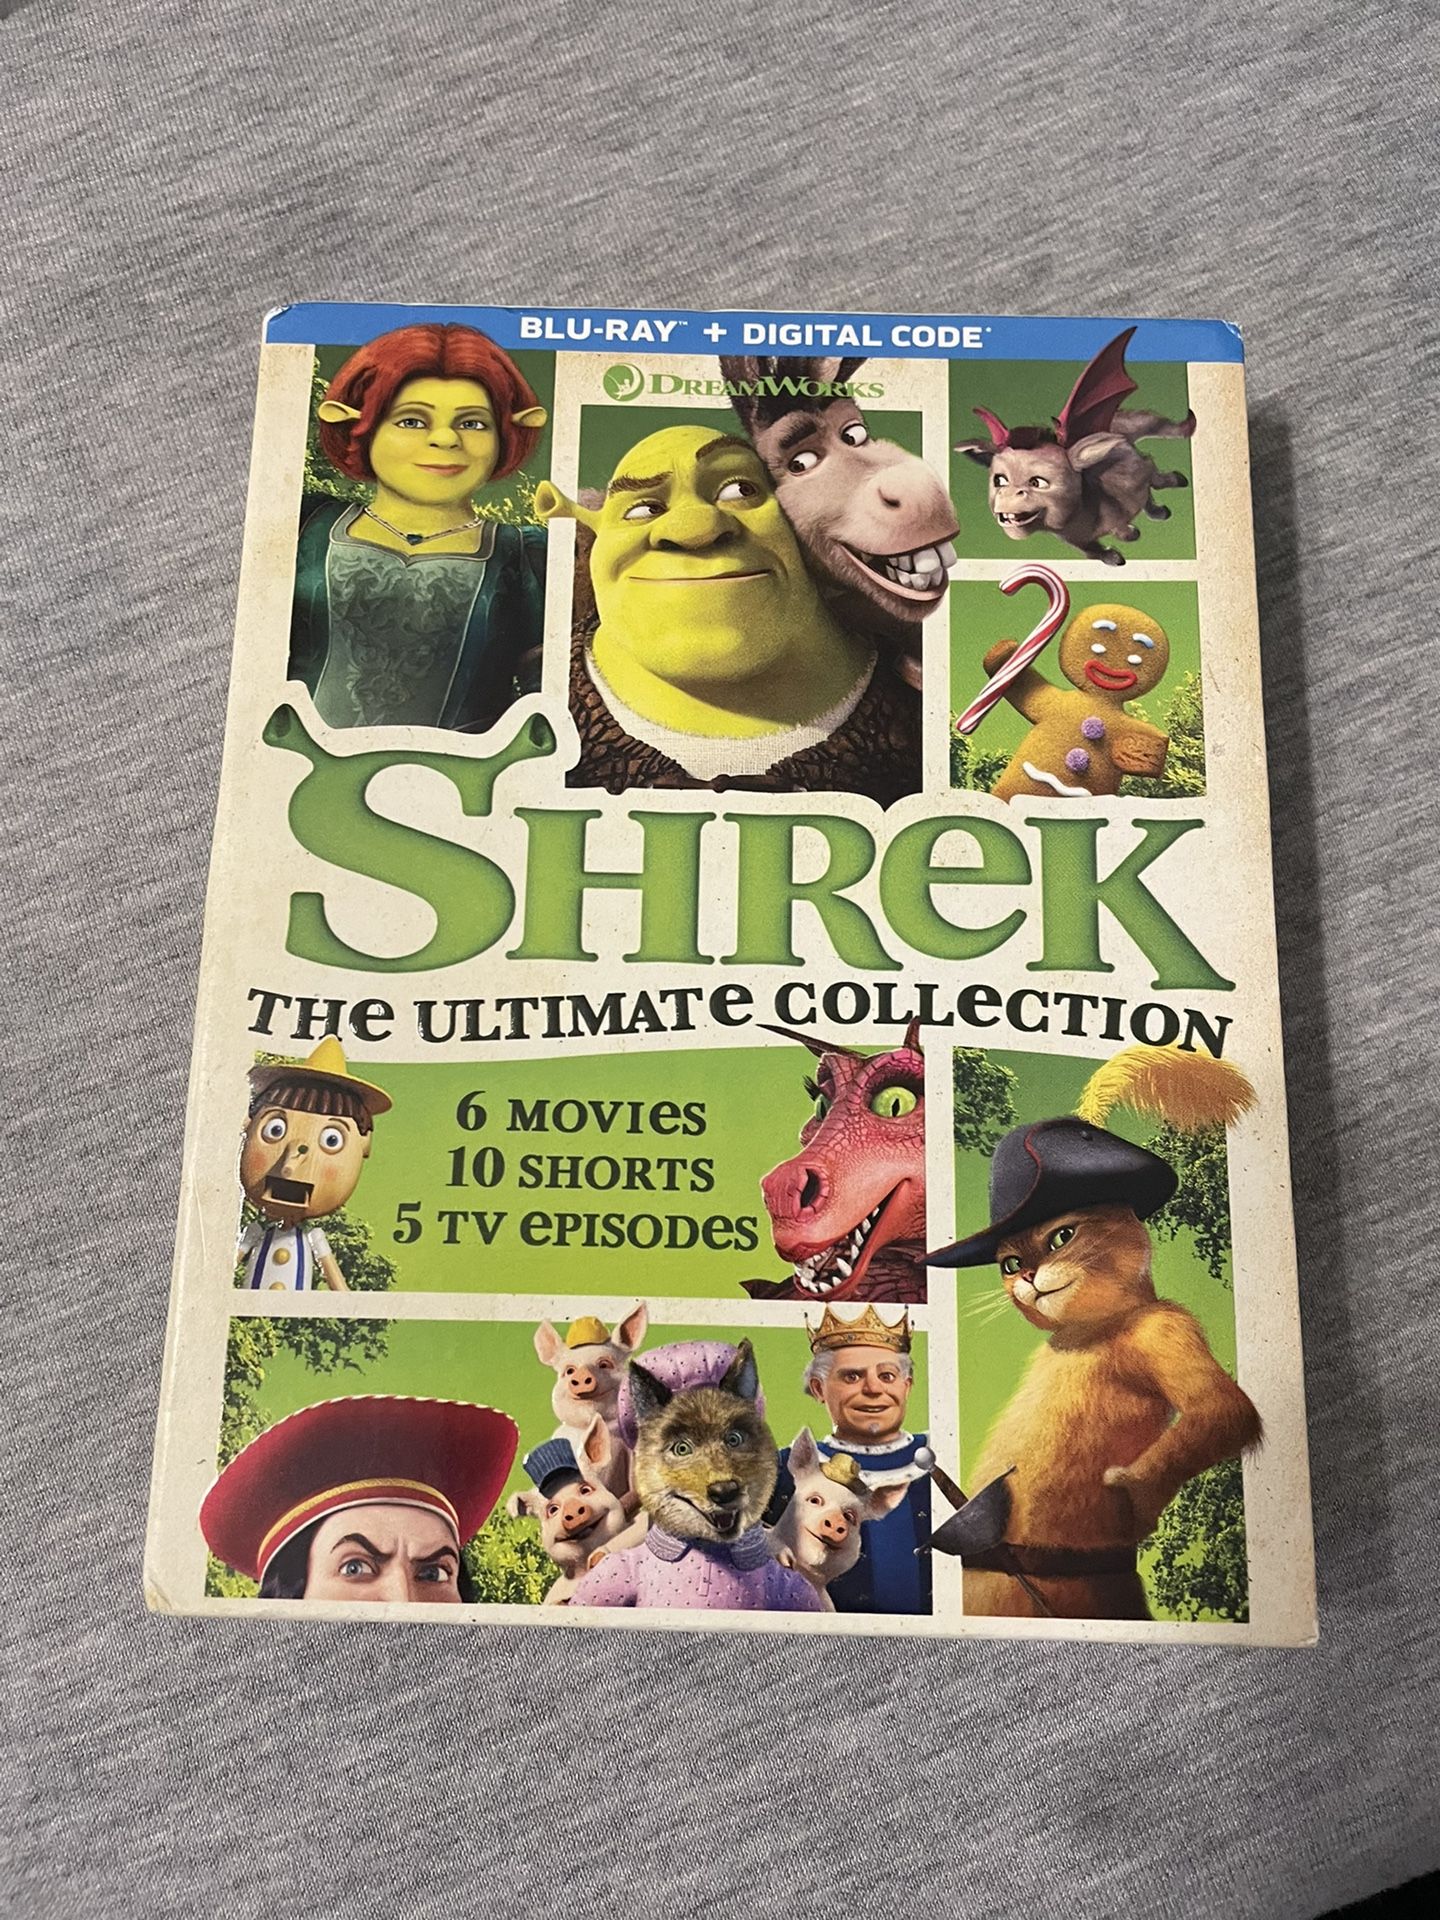 Shrek - The ultimate collection Blu-ray